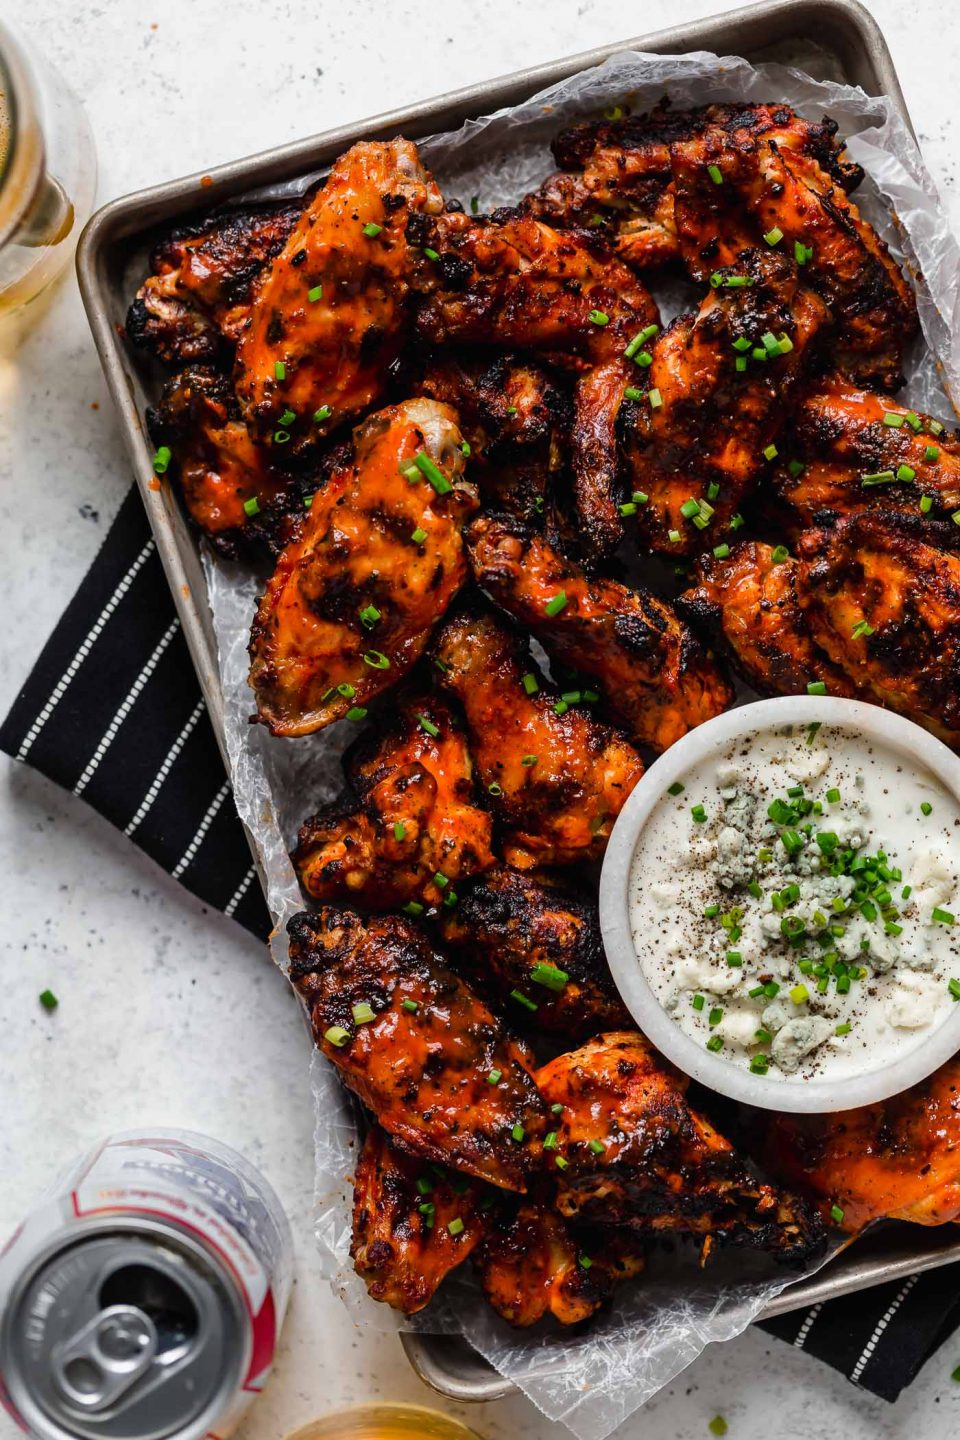 Best of 2019: The Top Recipes PWWB Readers Obsessed Over in 2019